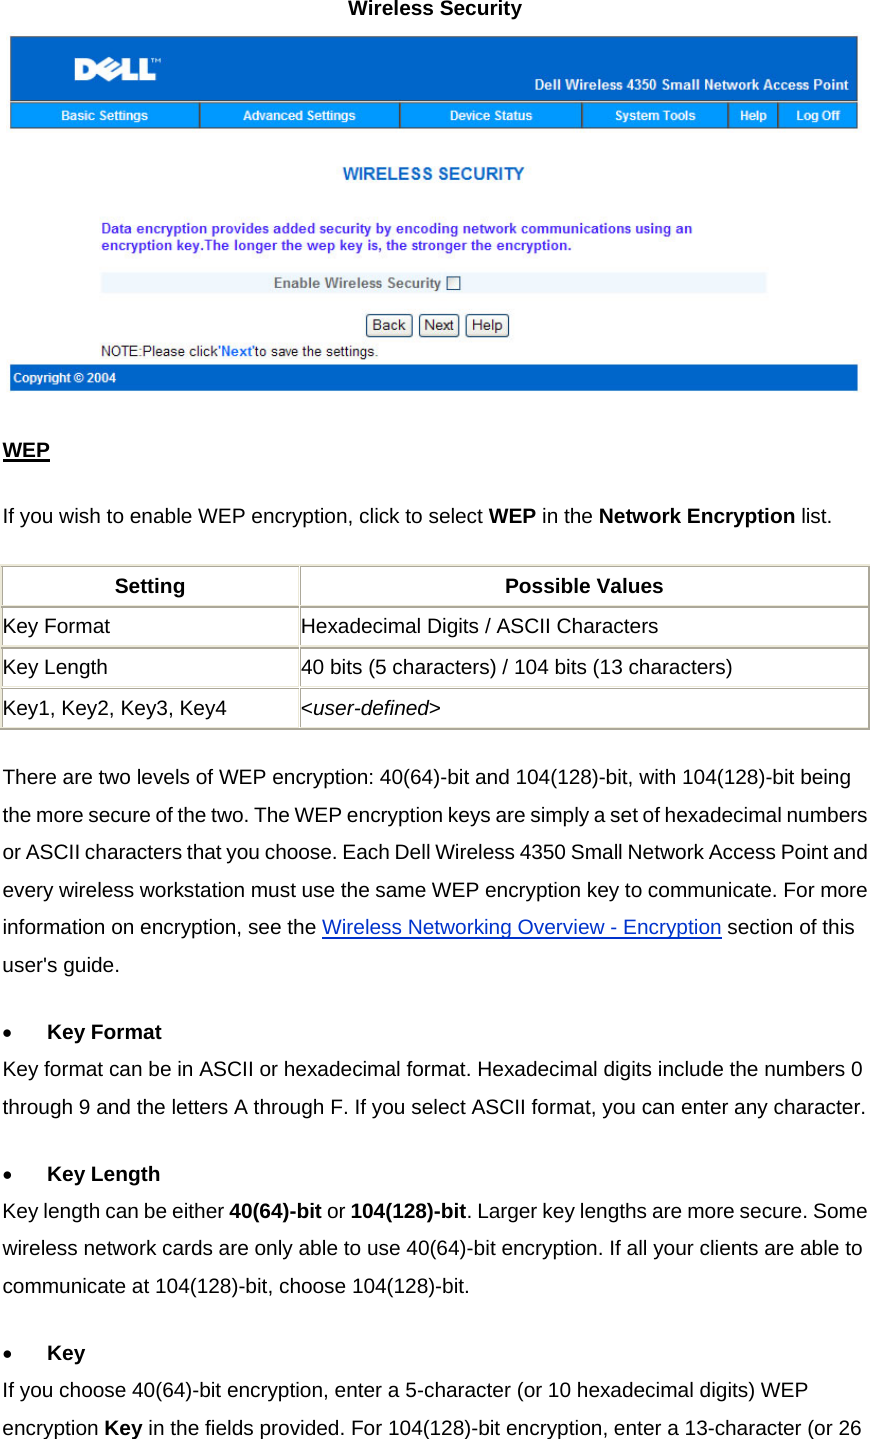 Wireless Security  WEPIf you wish to enable WEP encryption, click to select WEP in the Network Encryption list. Setting Possible Values Key Format  Hexadecimal Digits / ASCII Characters Key Length  40 bits (5 characters) / 104 bits (13 characters) Key1, Key2, Key3, Key4  &lt;user-defined&gt; There are two levels of WEP encryption: 40(64)-bit and 104(128)-bit, with 104(128)-bit being the more secure of the two. The WEP encryption keys are simply a set of hexadecimal numbers or ASCII characters that you choose. Each Dell Wireless 4350 Small Network Access Point and every wireless workstation must use the same WEP encryption key to communicate. For more information on encryption, see the Wireless Networking Overview - Encryption section of this user&apos;s guide. •          Key Format Key format can be in ASCII or hexadecimal format. Hexadecimal digits include the numbers 0 through 9 and the letters A through F. If you select ASCII format, you can enter any character.  •          Key Length Key length can be either 40(64)-bit or 104(128)-bit. Larger key lengths are more secure. Some wireless network cards are only able to use 40(64)-bit encryption. If all your clients are able to communicate at 104(128)-bit, choose 104(128)-bit.  •          Key If you choose 40(64)-bit encryption, enter a 5-character (or 10 hexadecimal digits) WEP encryption Key in the fields provided. For 104(128)-bit encryption, enter a 13-character (or 26 